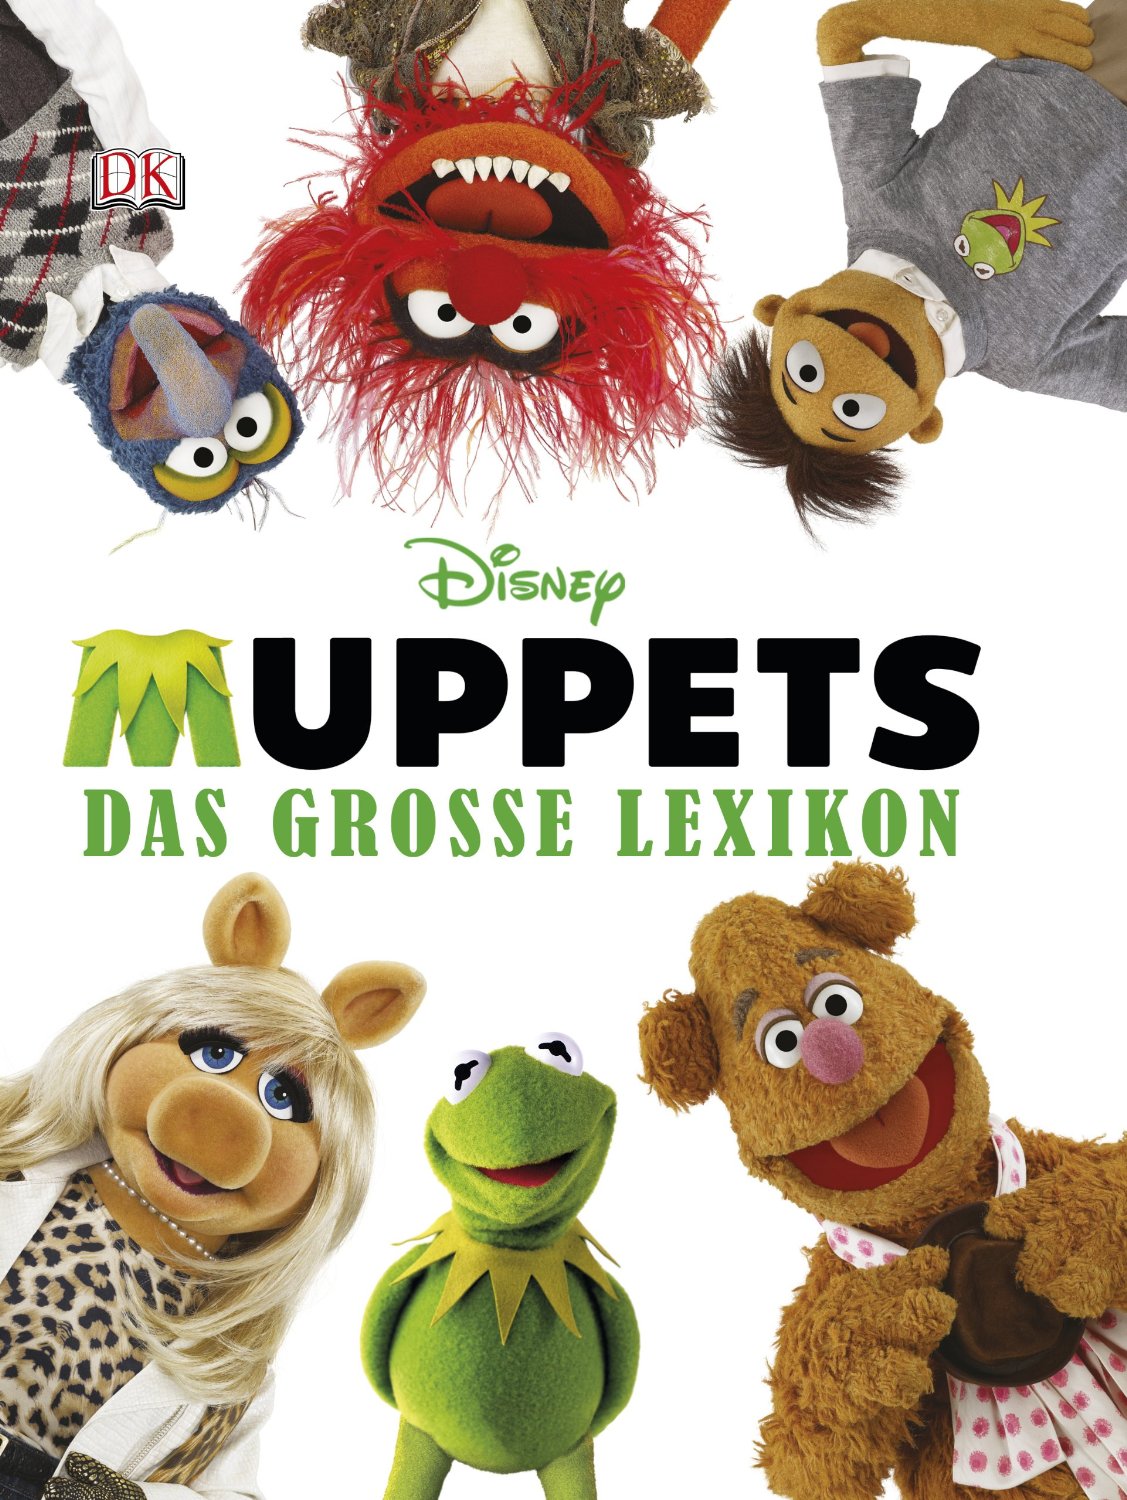 muppet show characters pictures and names